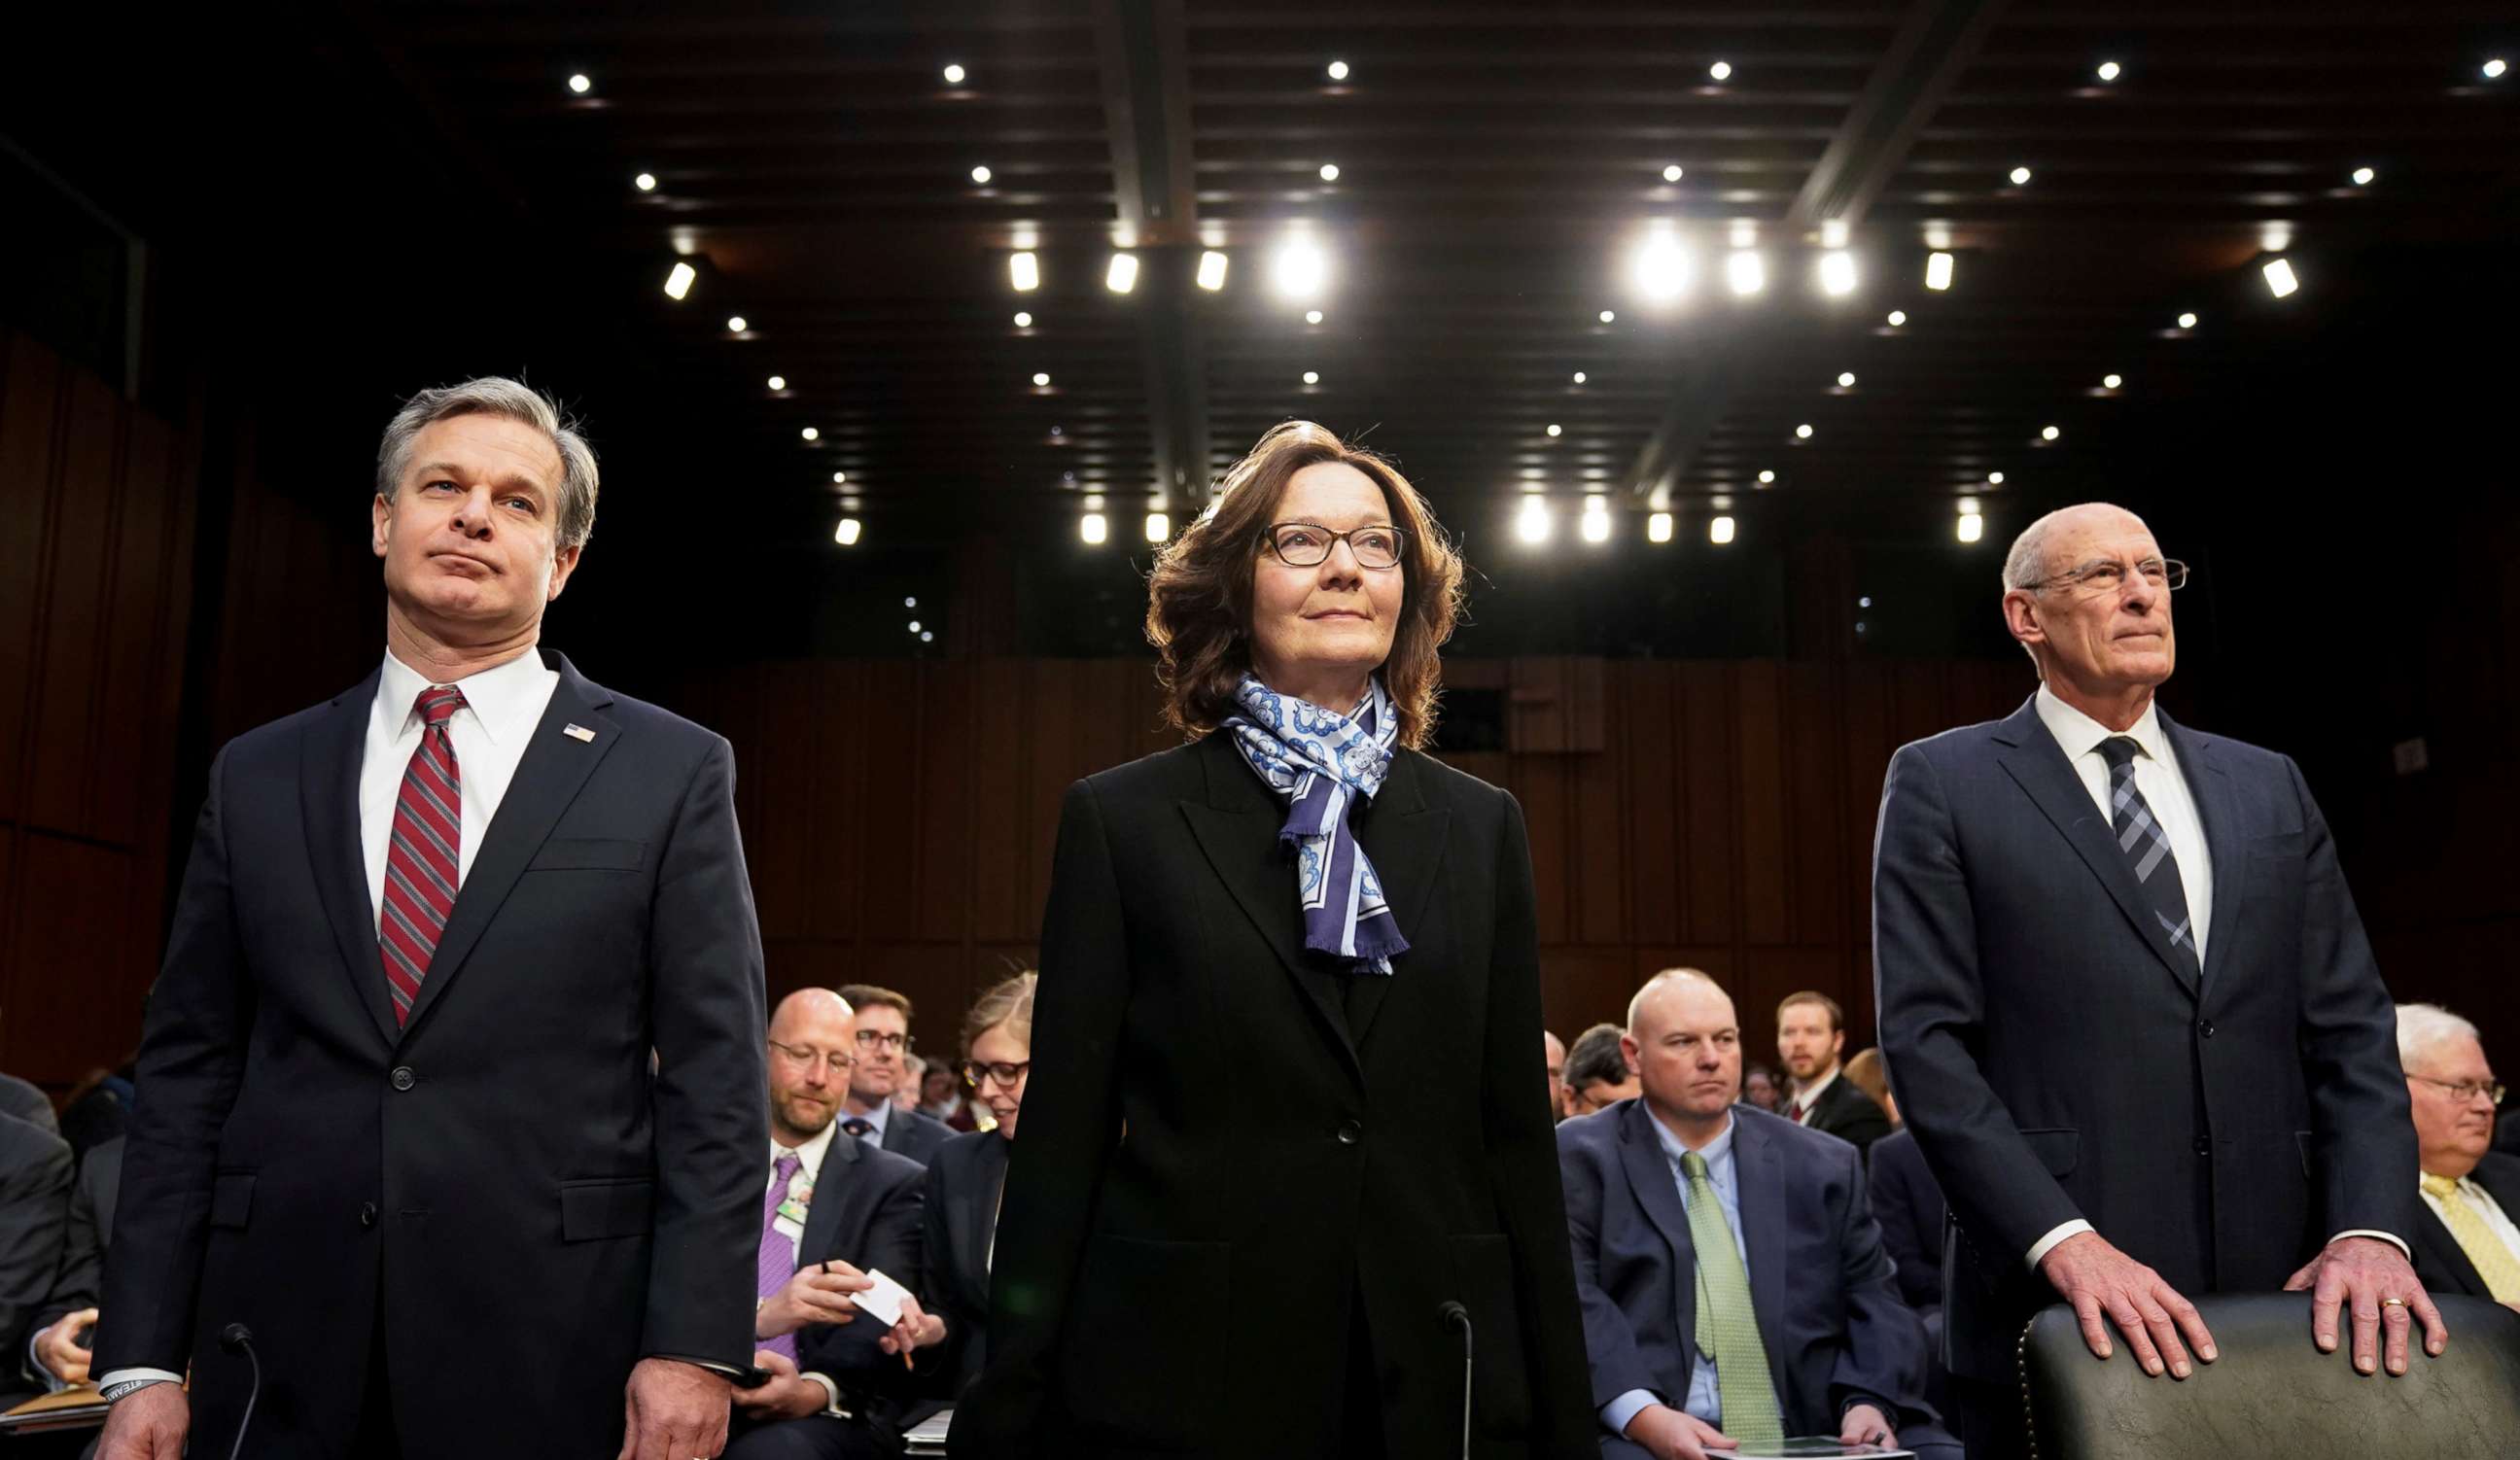 PHOTO: FBI Director Christopher Wray; CIA Director Gina Haspel and Director of National Intelligence Dan Coats arrive to testify before a Senate Intelligence Committee hearing on "worldwide threats" on Capitol Hill in Washington,D.C., Jan. 29, 2019.